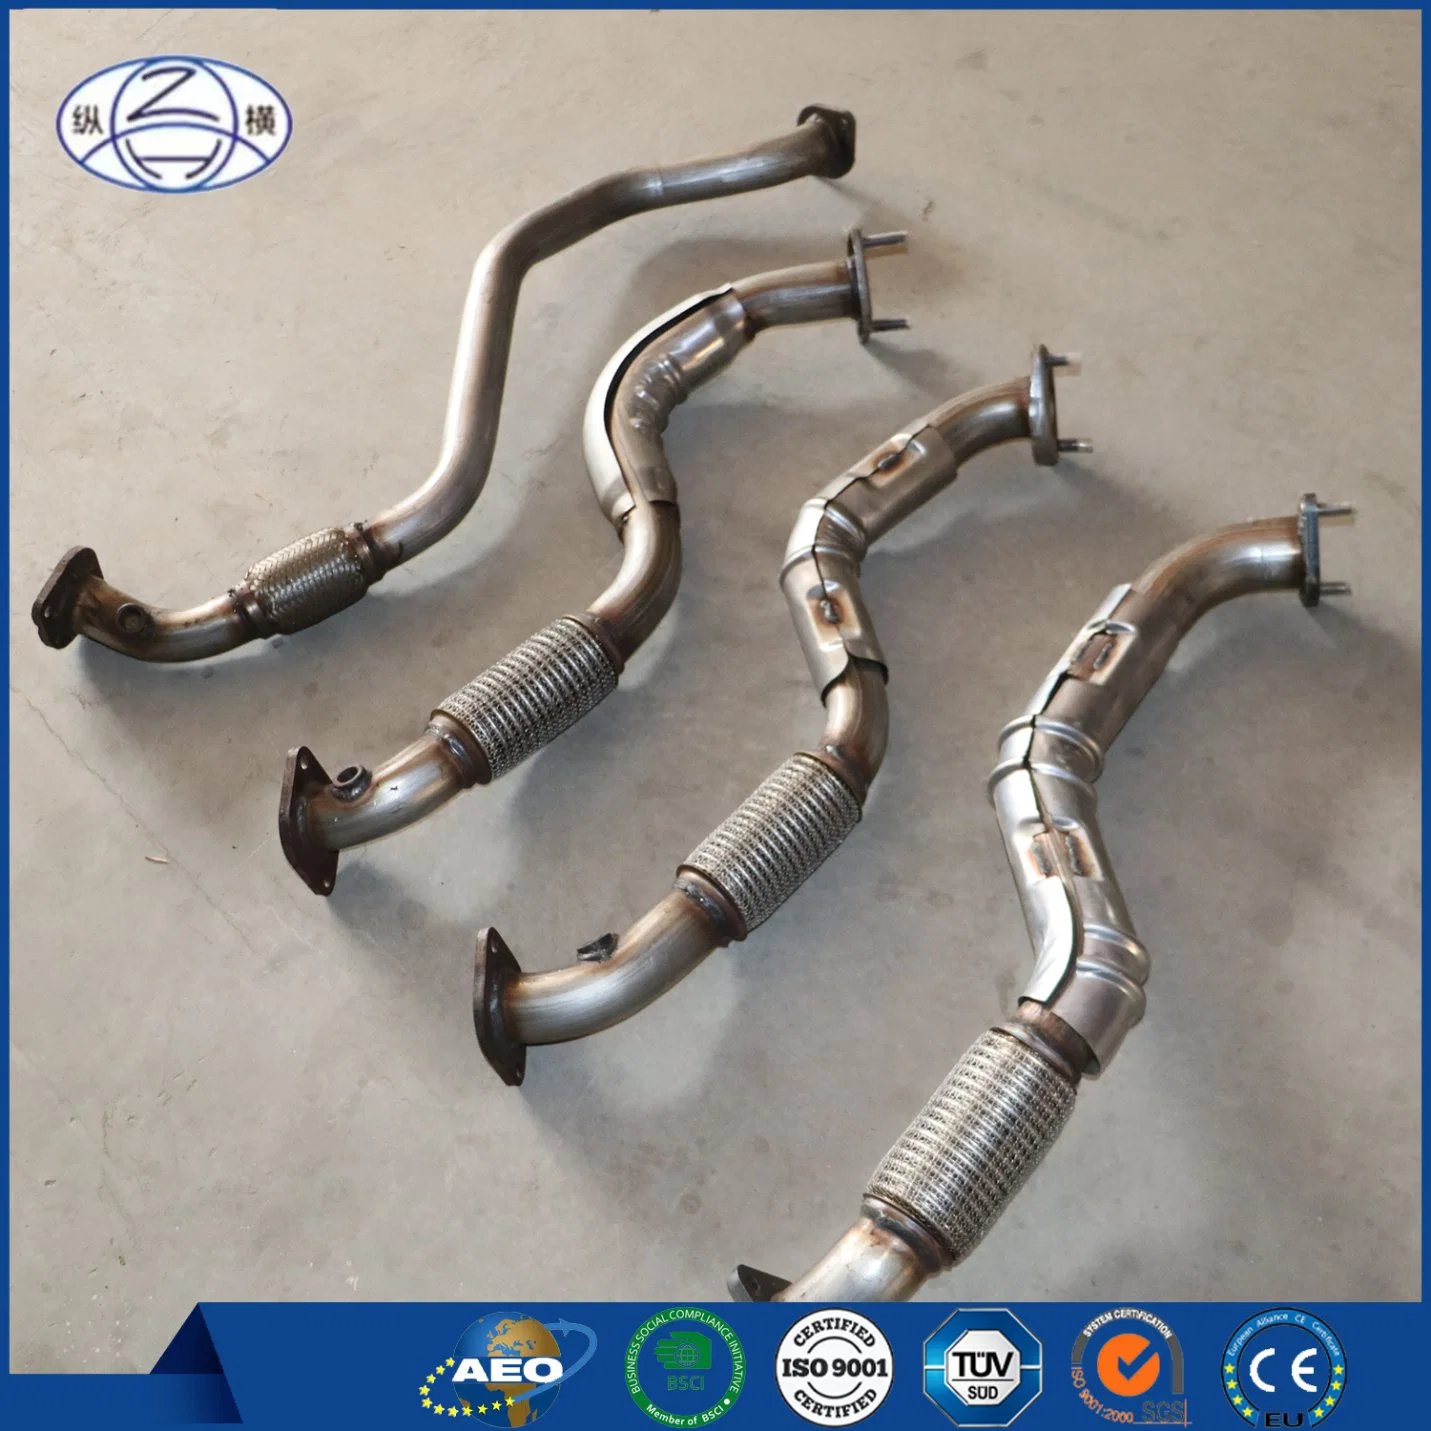 Exhaust Mufflers and Exhaust Systems for Cars, Trucks and Suvs